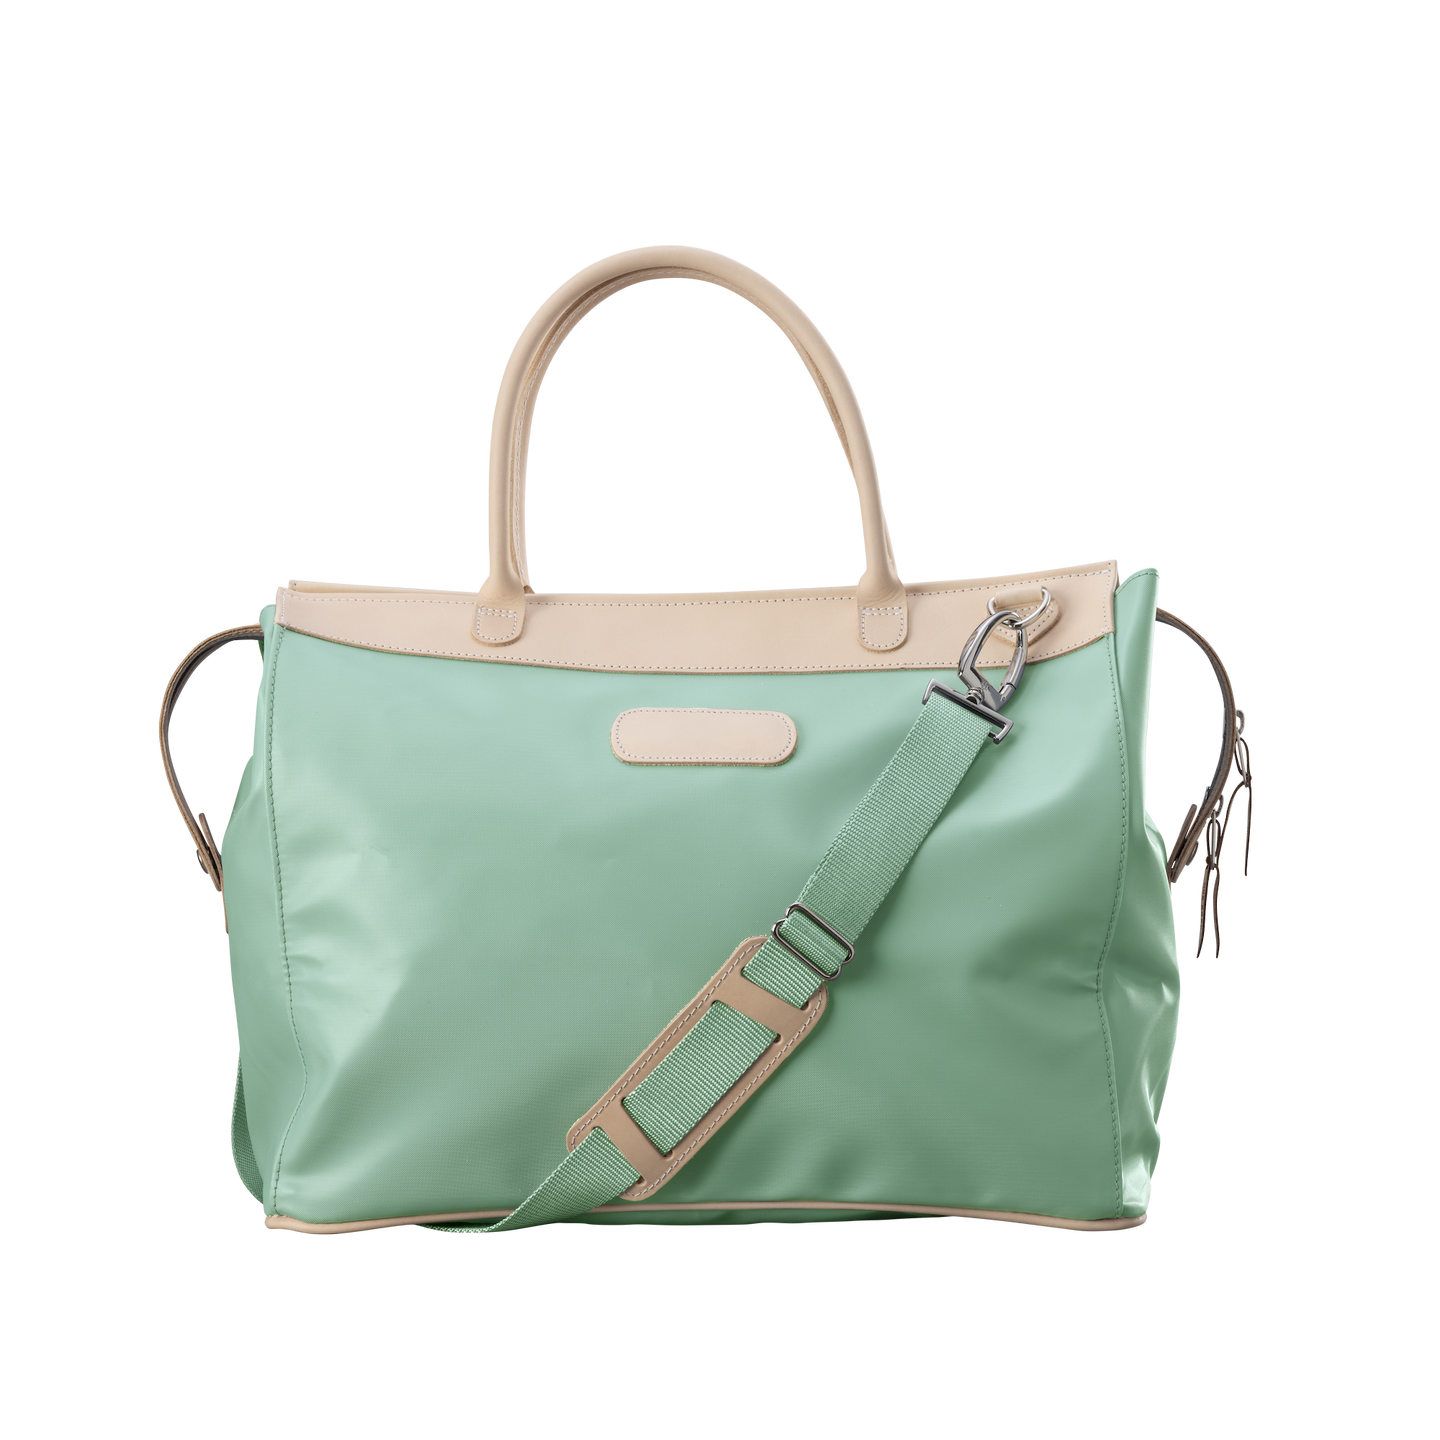 Burleson Bag - Mint Coated Canvas Front Angle in Color 'Mint Coated Canvas'